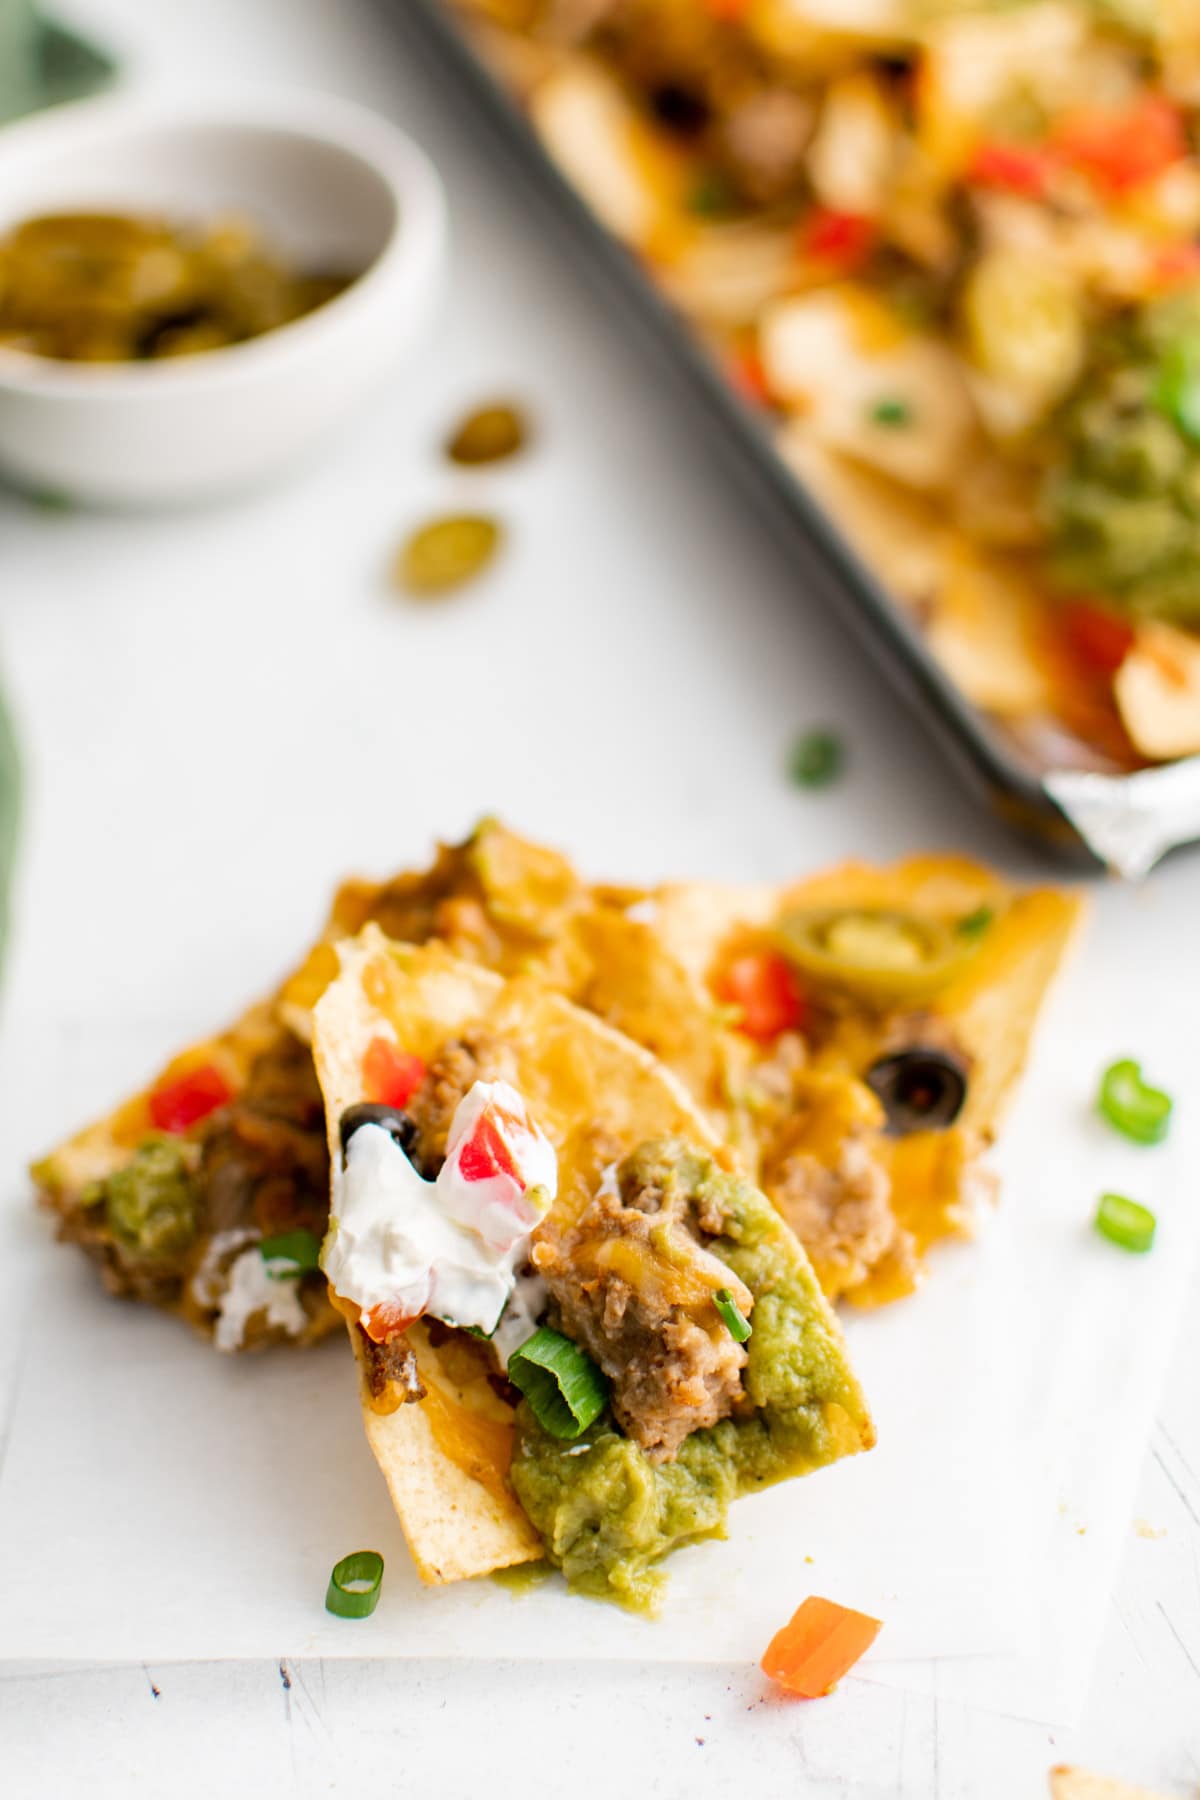 tortilla chips with nacho toppings